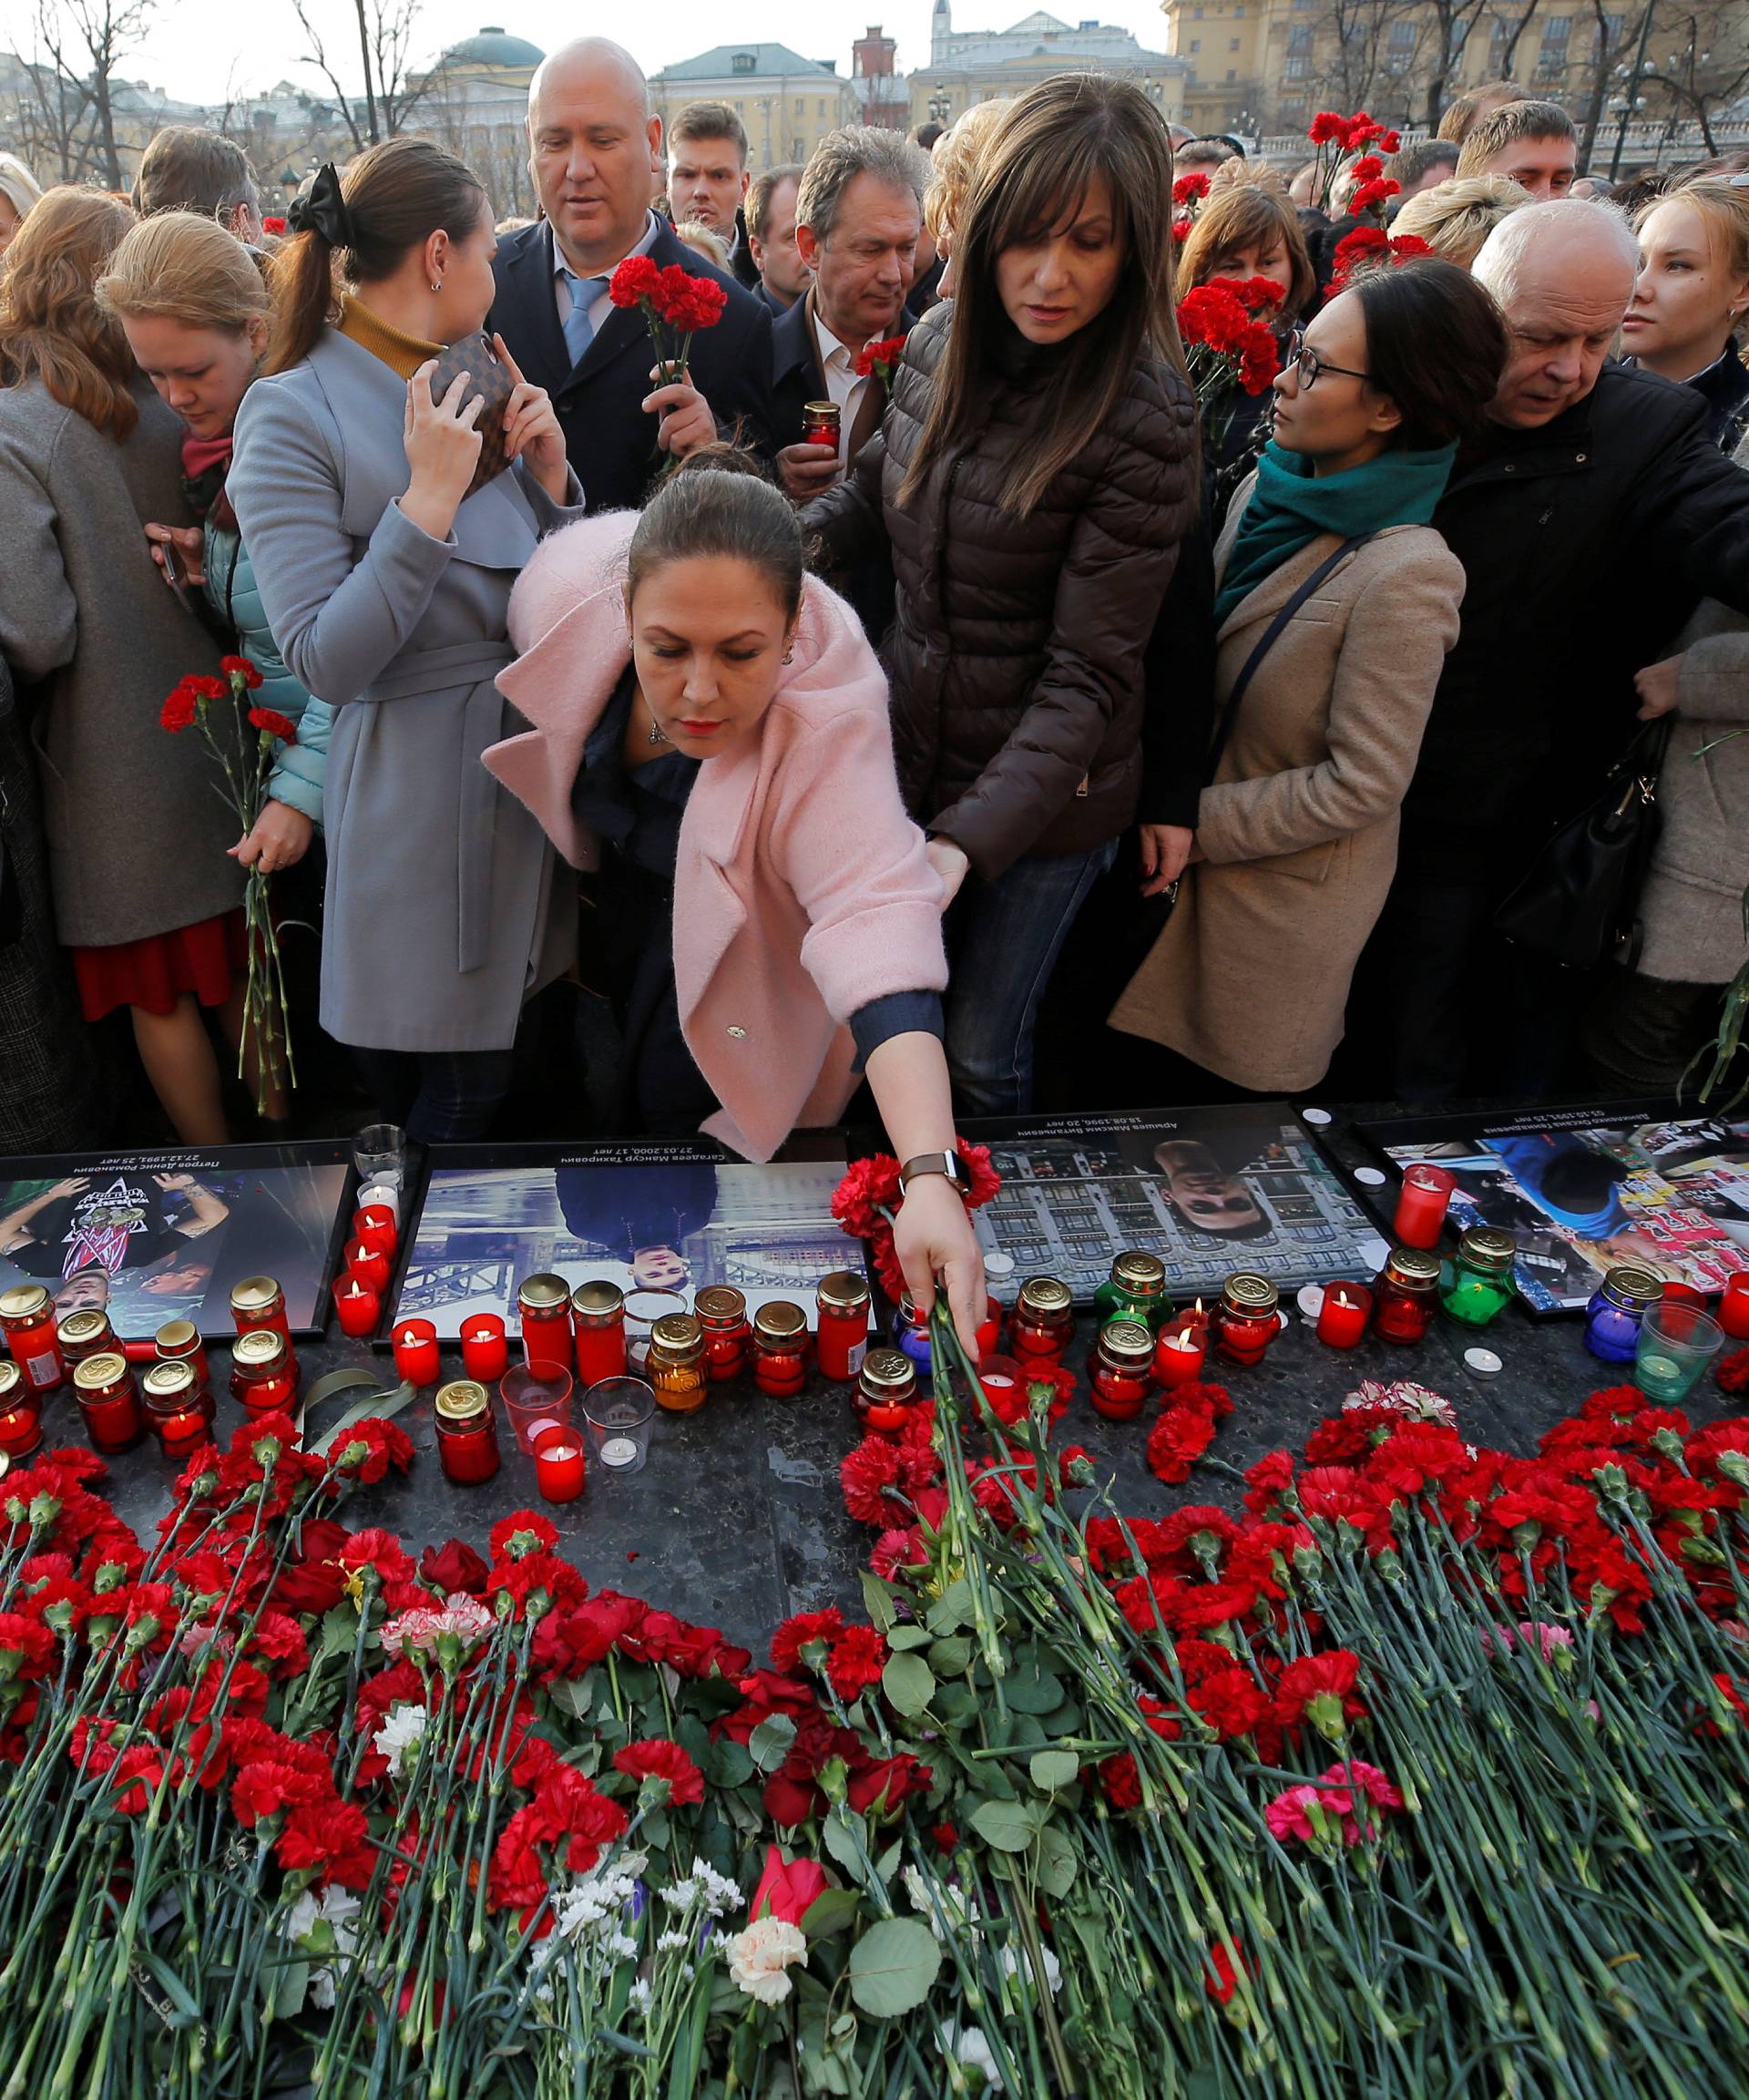 People attend a memorial to pay tribute to the victims of the St. Petersburg metro blast in central Moscow